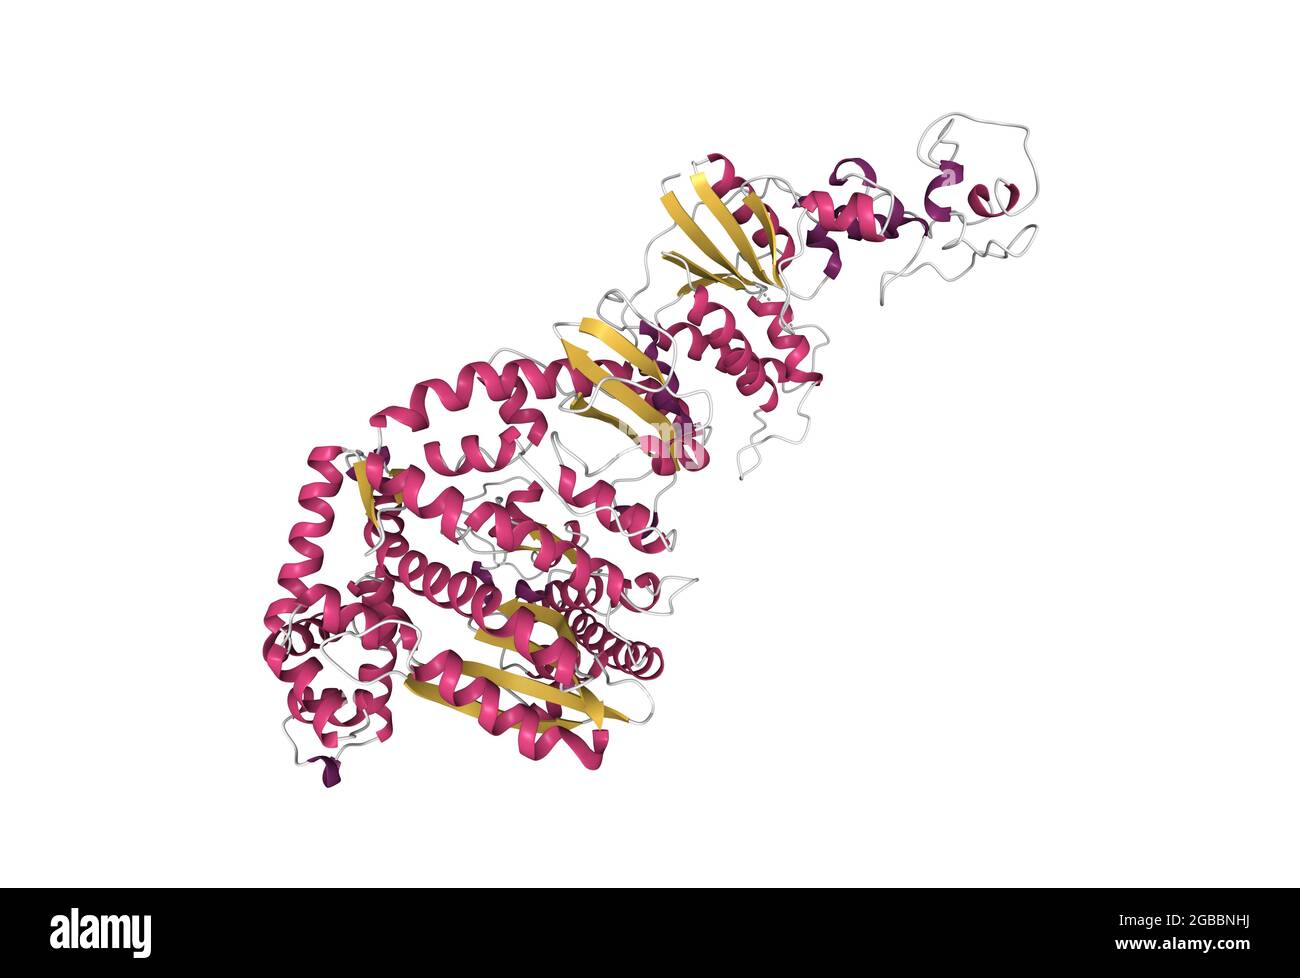 Structure of Taq DNA polymenrase, 3D cartoon model, secondary structure color scheme, based on PDB 1taq, white background Stock Photo